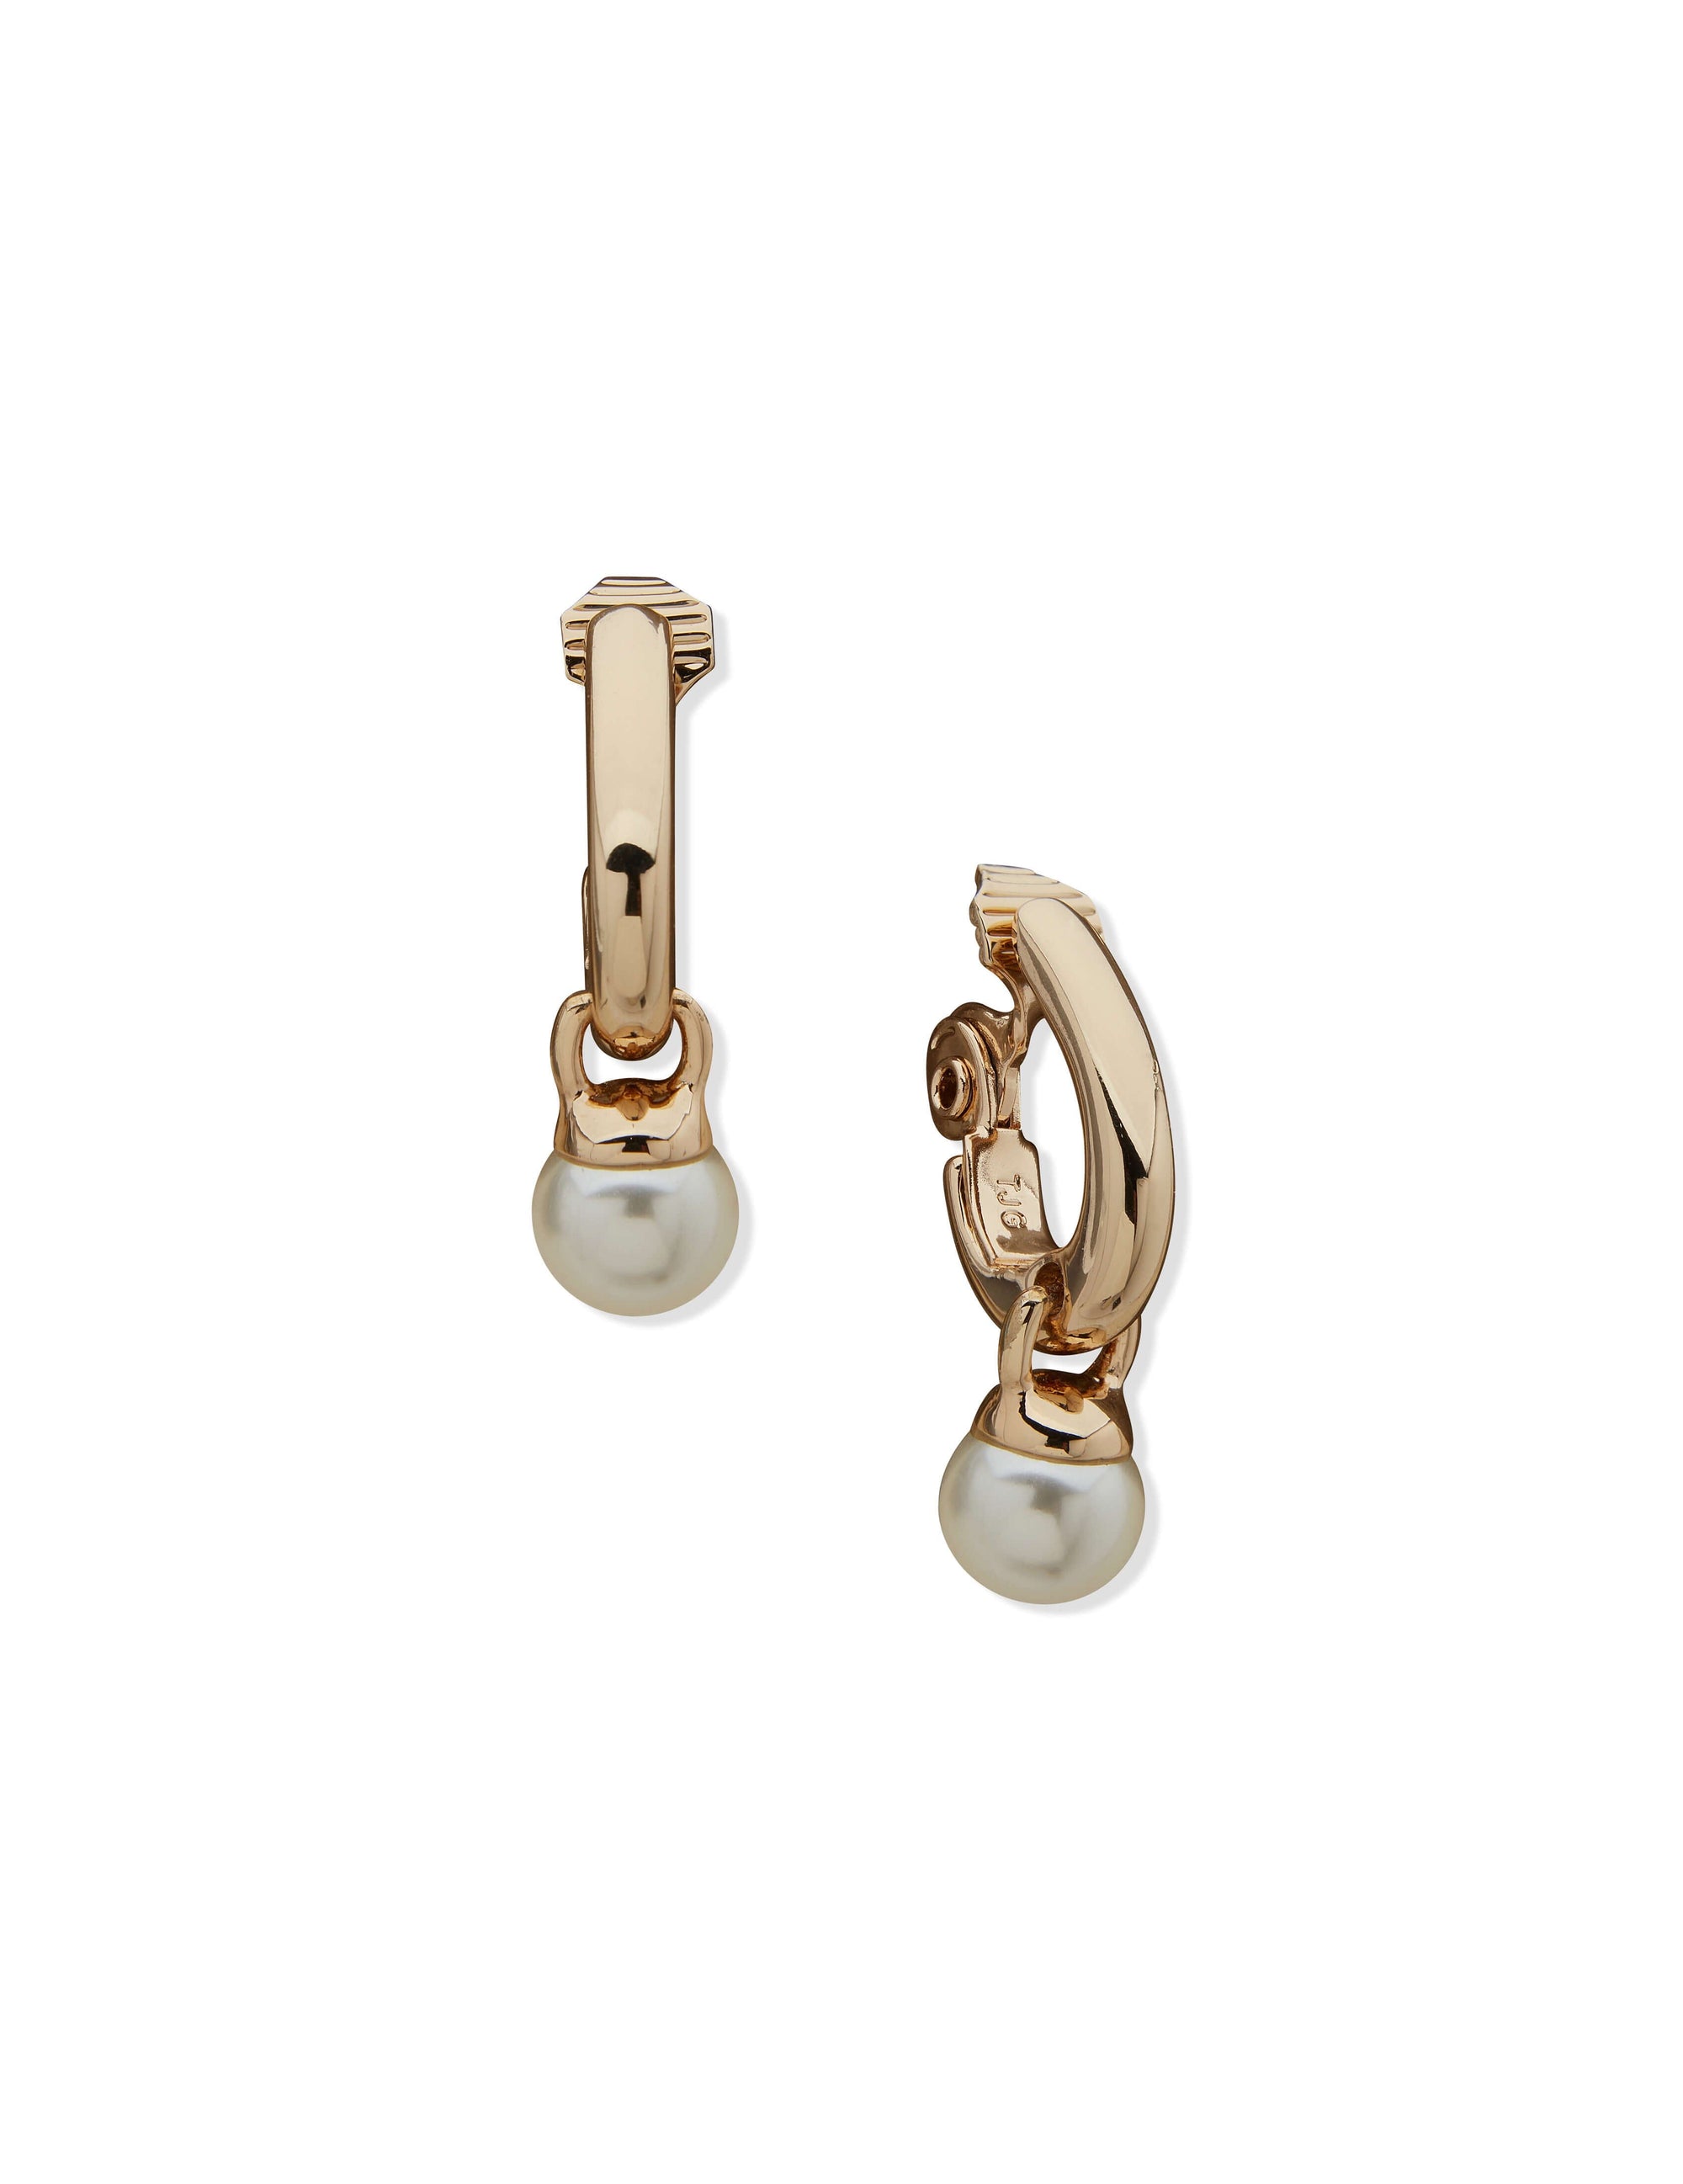 Elegant Gold Earrings That You Will Wear Every Day – Nikki Lorenz Designs